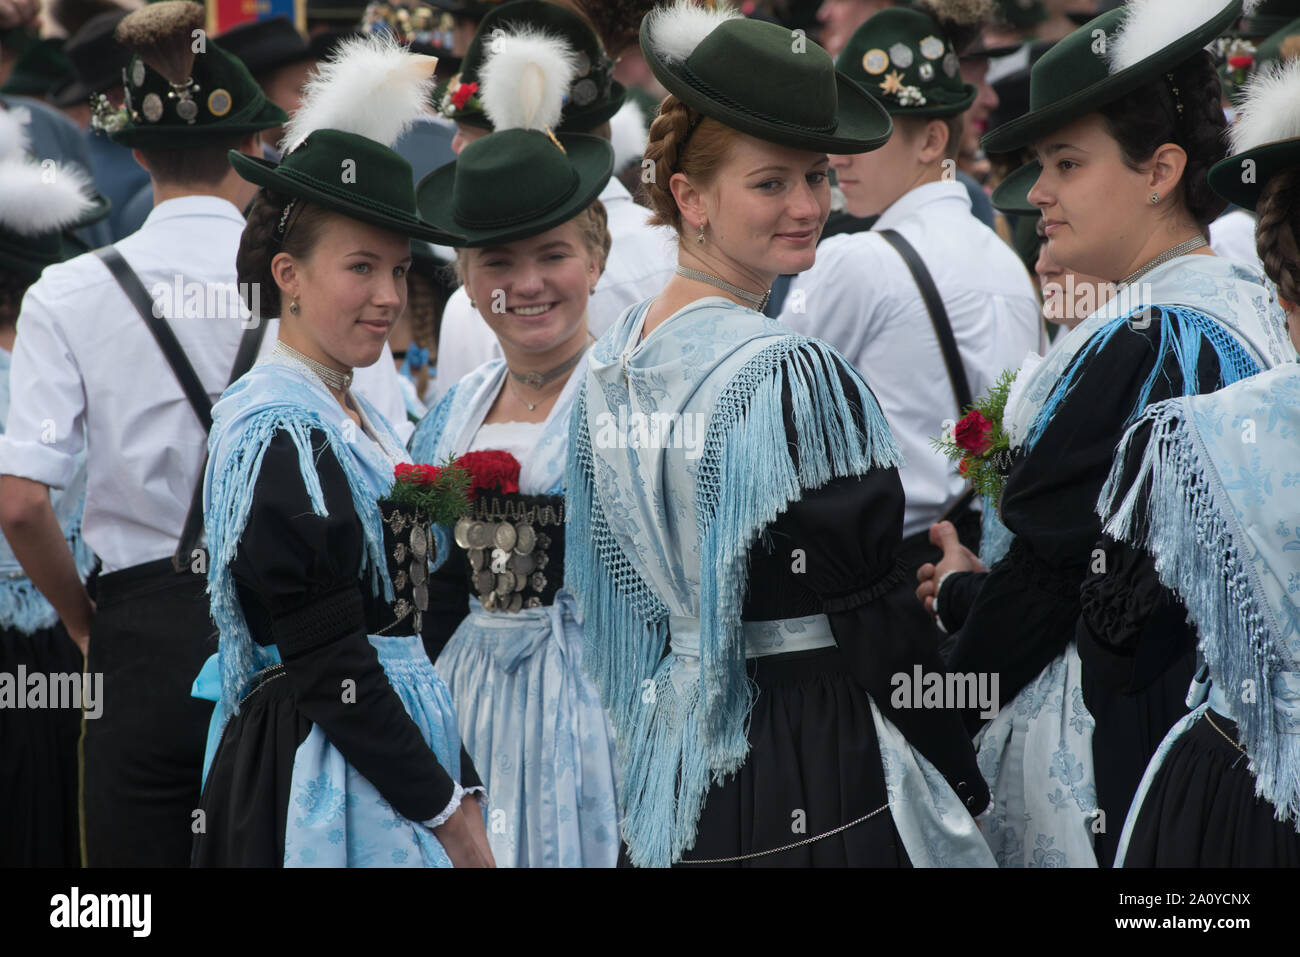 young women in Bavarian traditional costumes, seen before the costume parade on the occasion of Oktoberfest in Munich Stock Photo